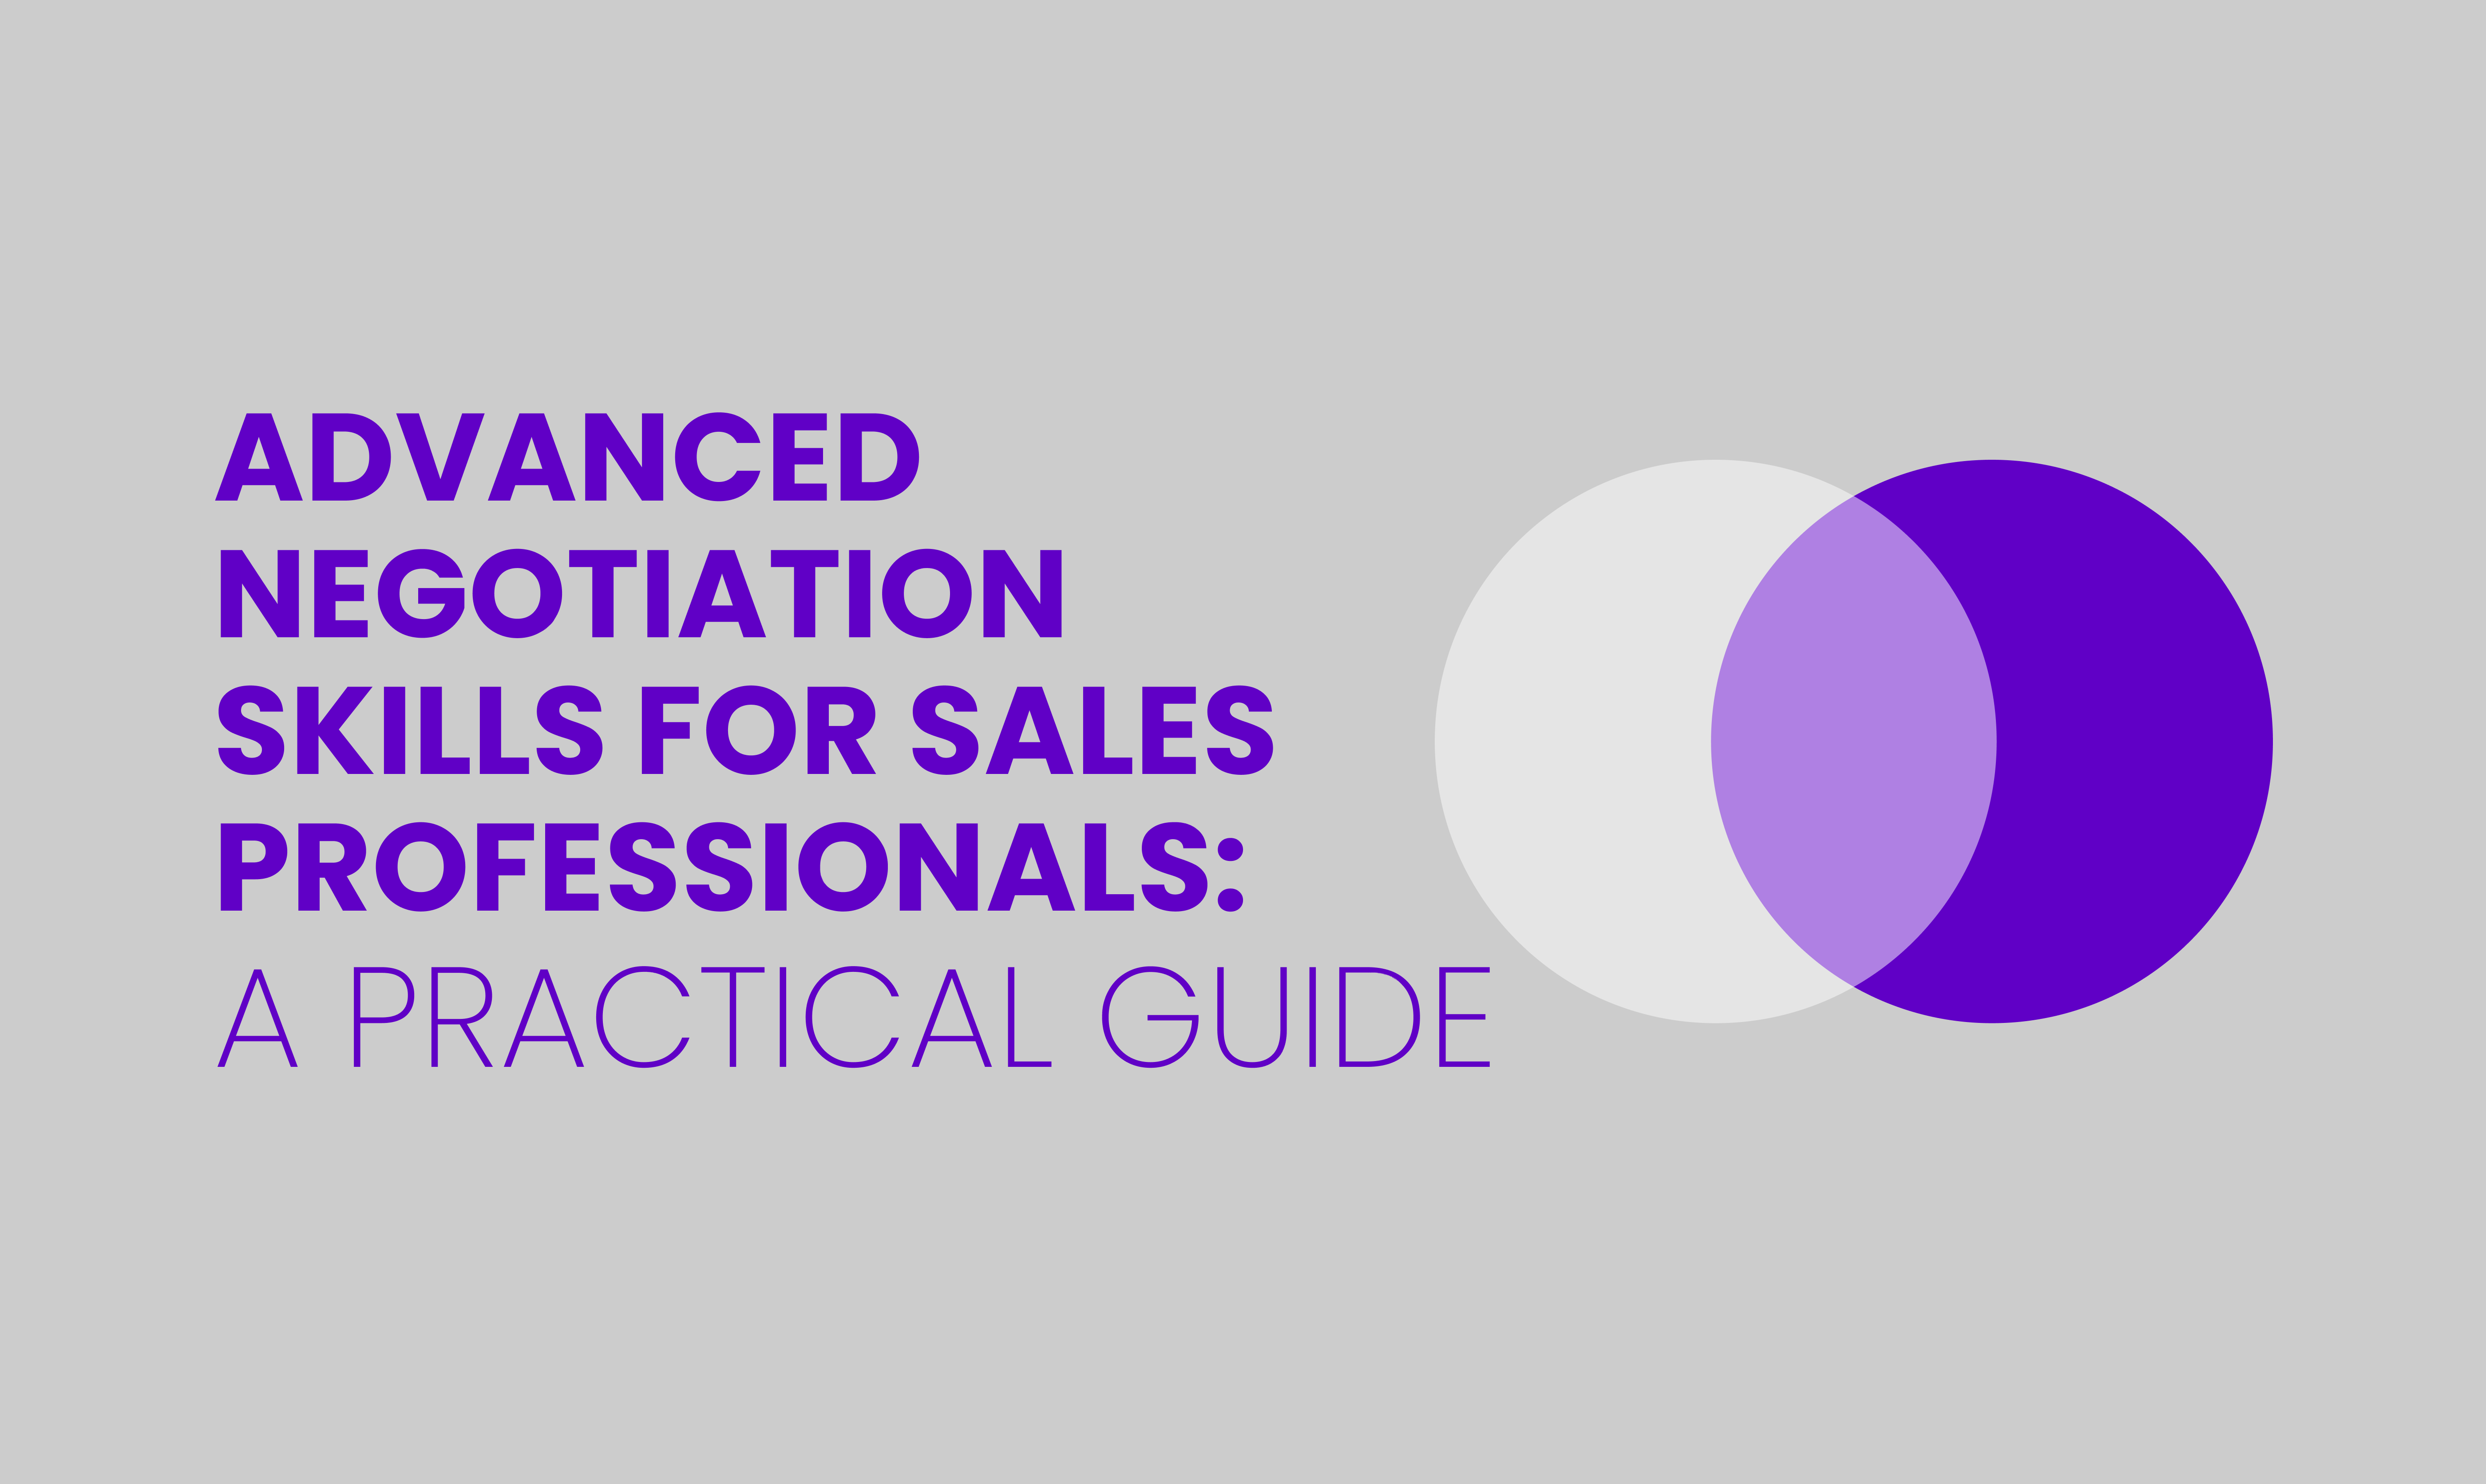 ADVANCED NEGOTIATION SKILLS FOR SALES PROFESSIONALS:  A PRACTICAL GUIDE